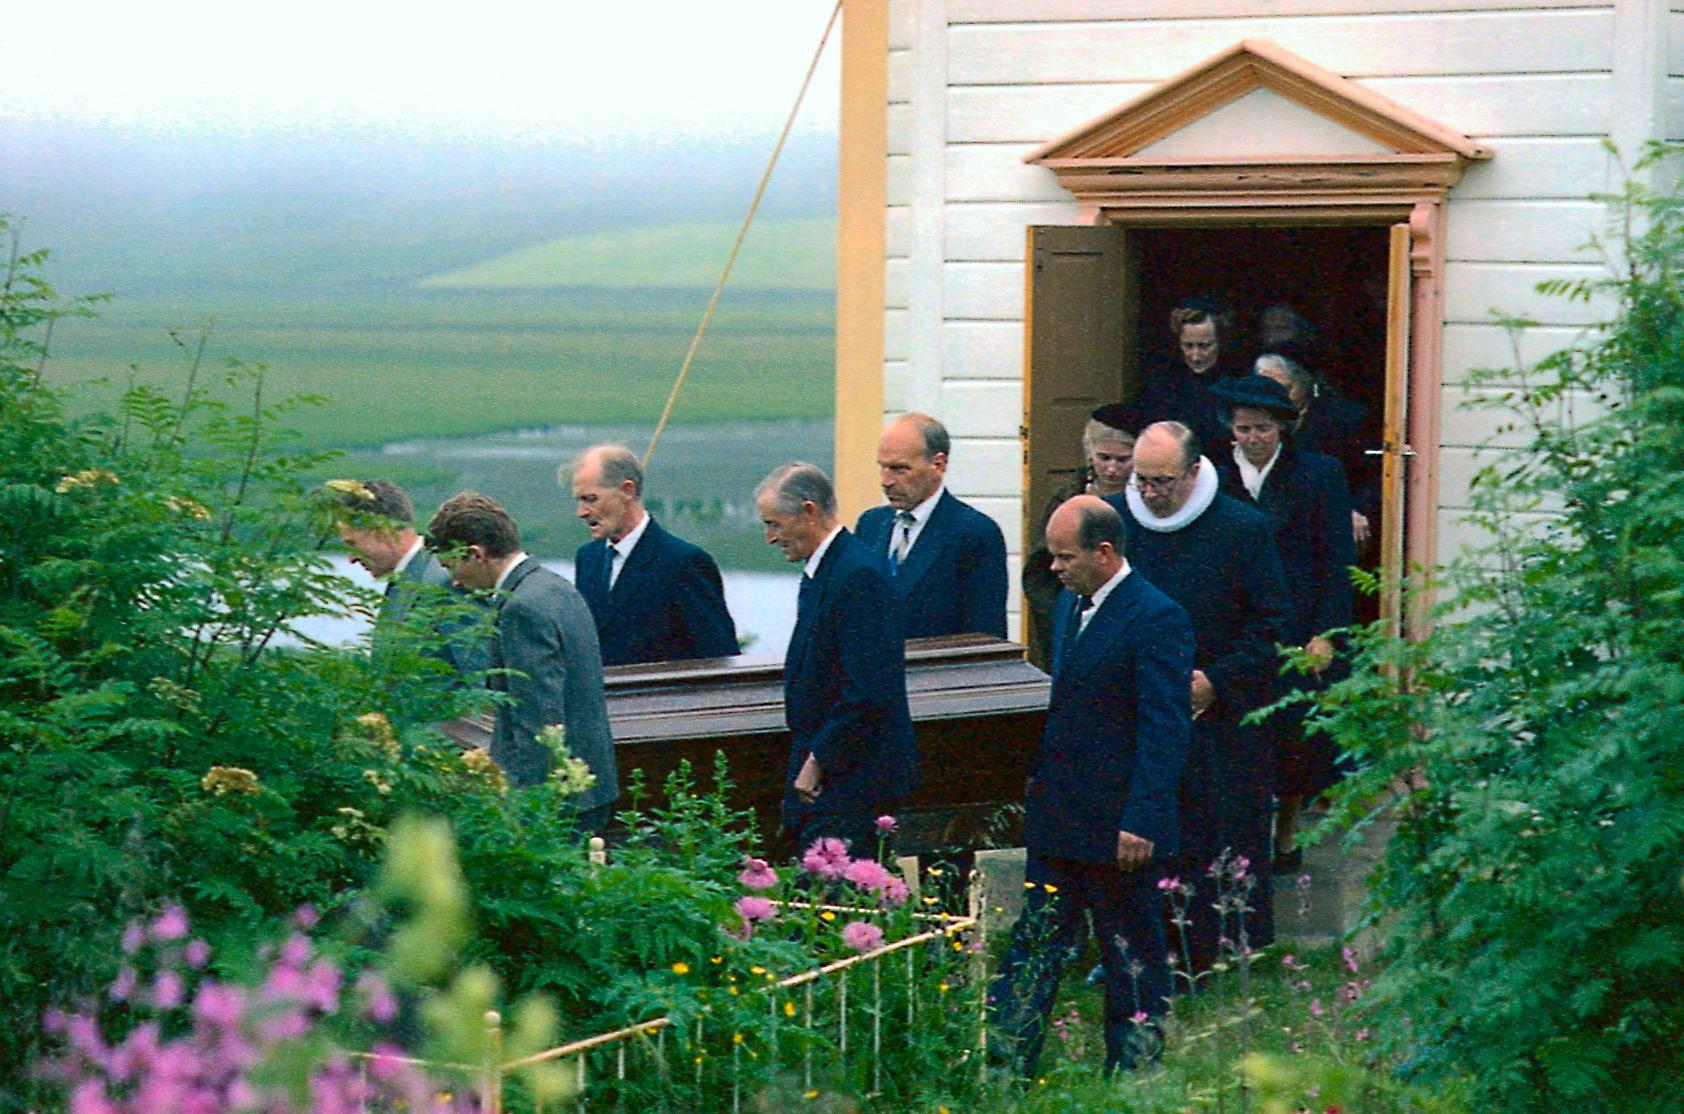 
	        Indriði, the author of the original novel, played the local minister.